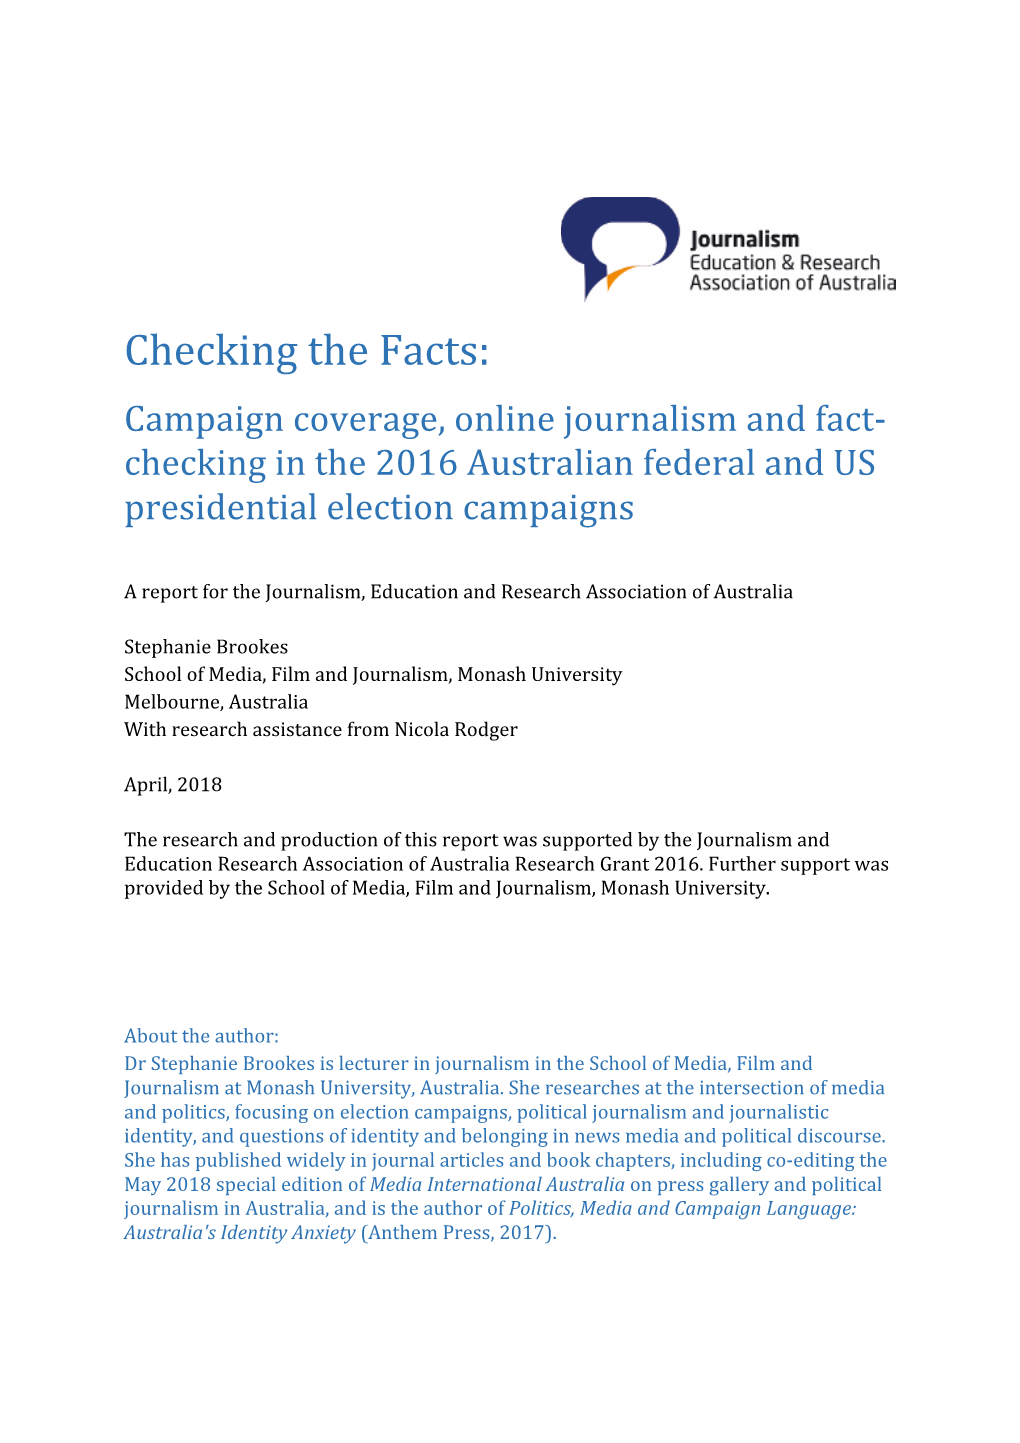 Campaign Coverage, Online Journalism and Fact- Checking in the 2016 Australian Federal and US Presidential Election Campaigns